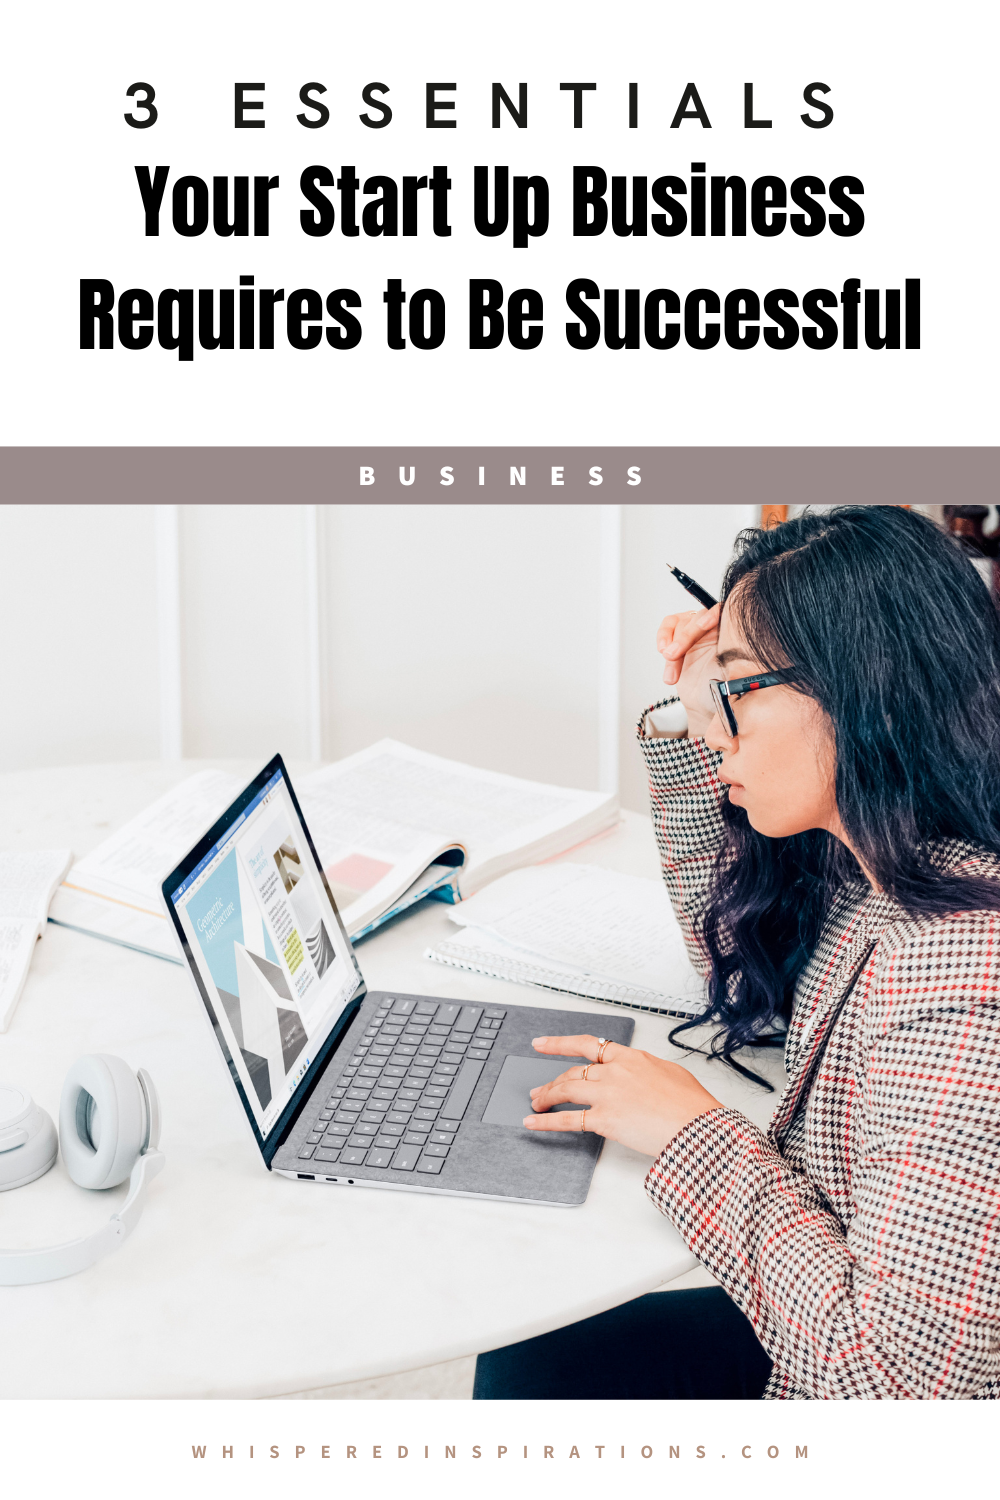 A woman sits at a desk working on a computer. She has a pen in hand and has it lifted by her head. This article covers essentials your startup business requires to be successful.